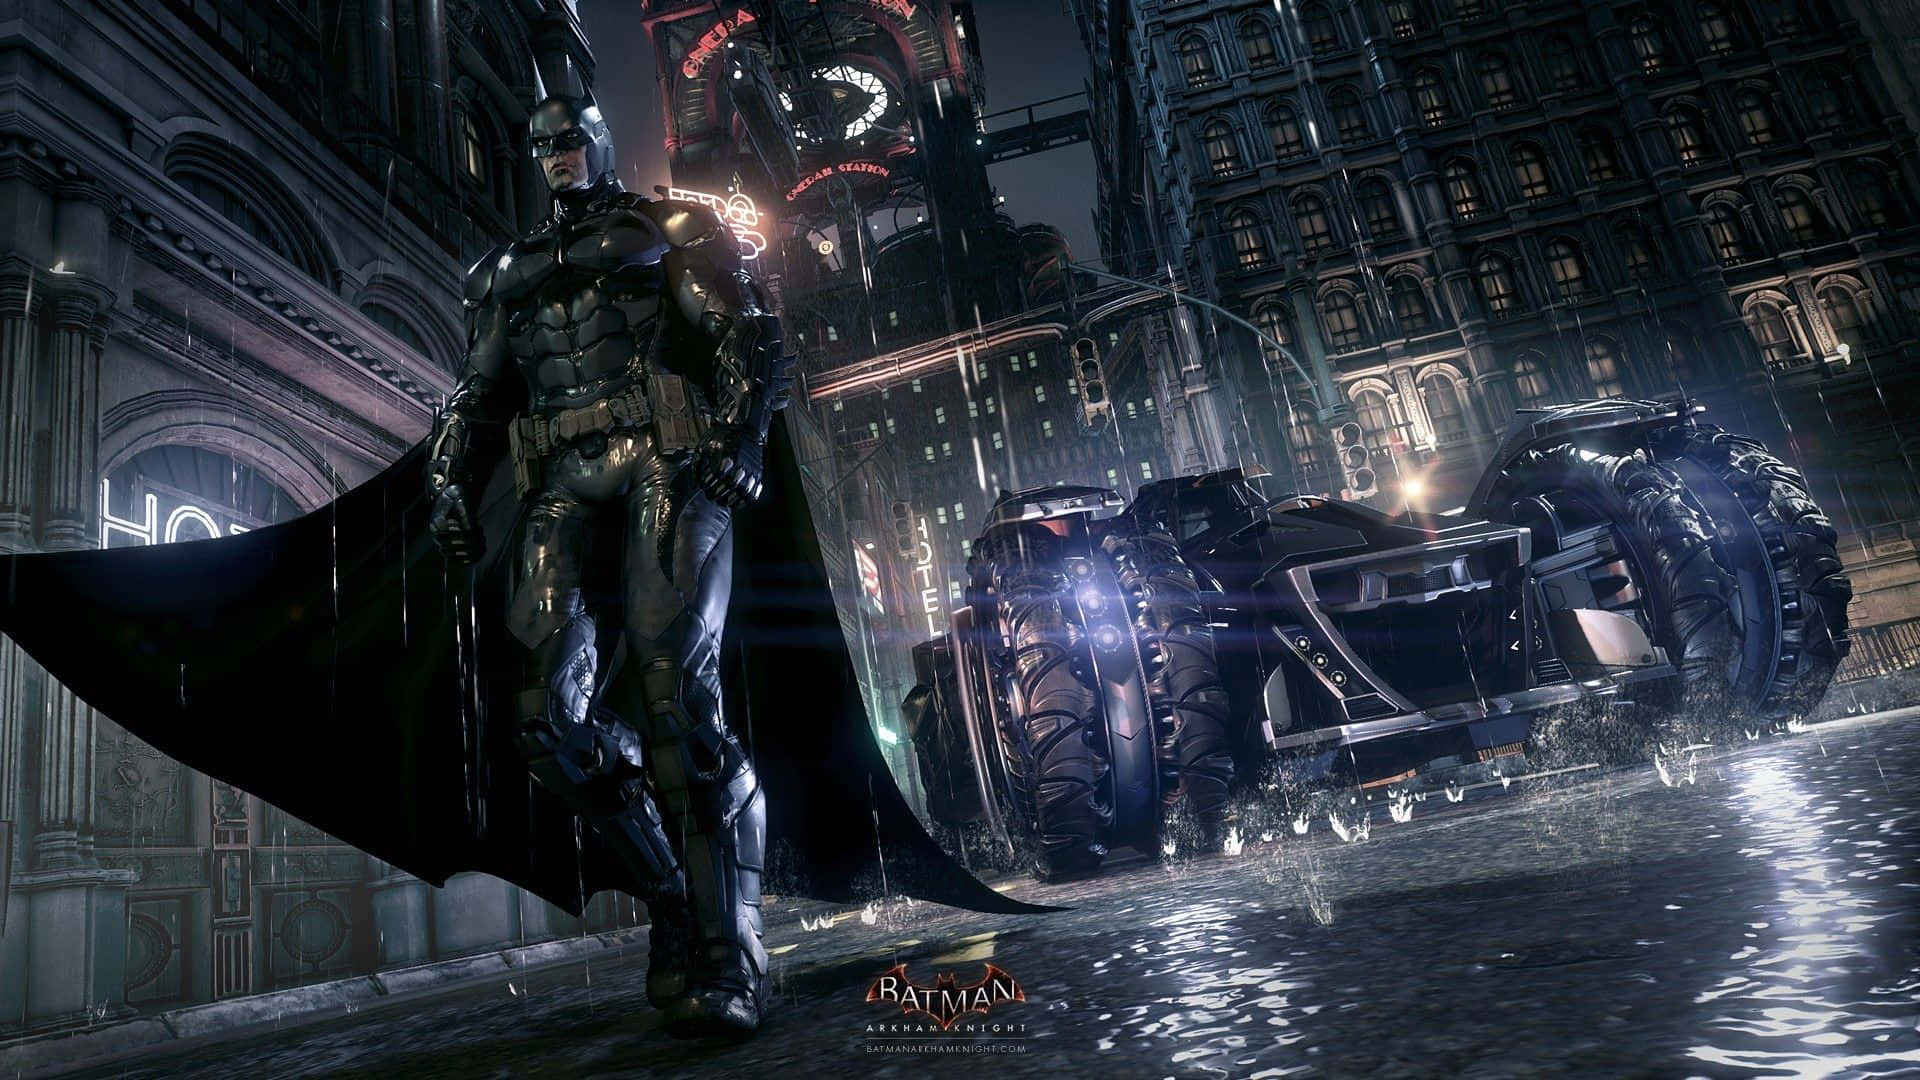 An epic showdown between Batman and the Arkham Knight in stunning 4K quality Wallpaper